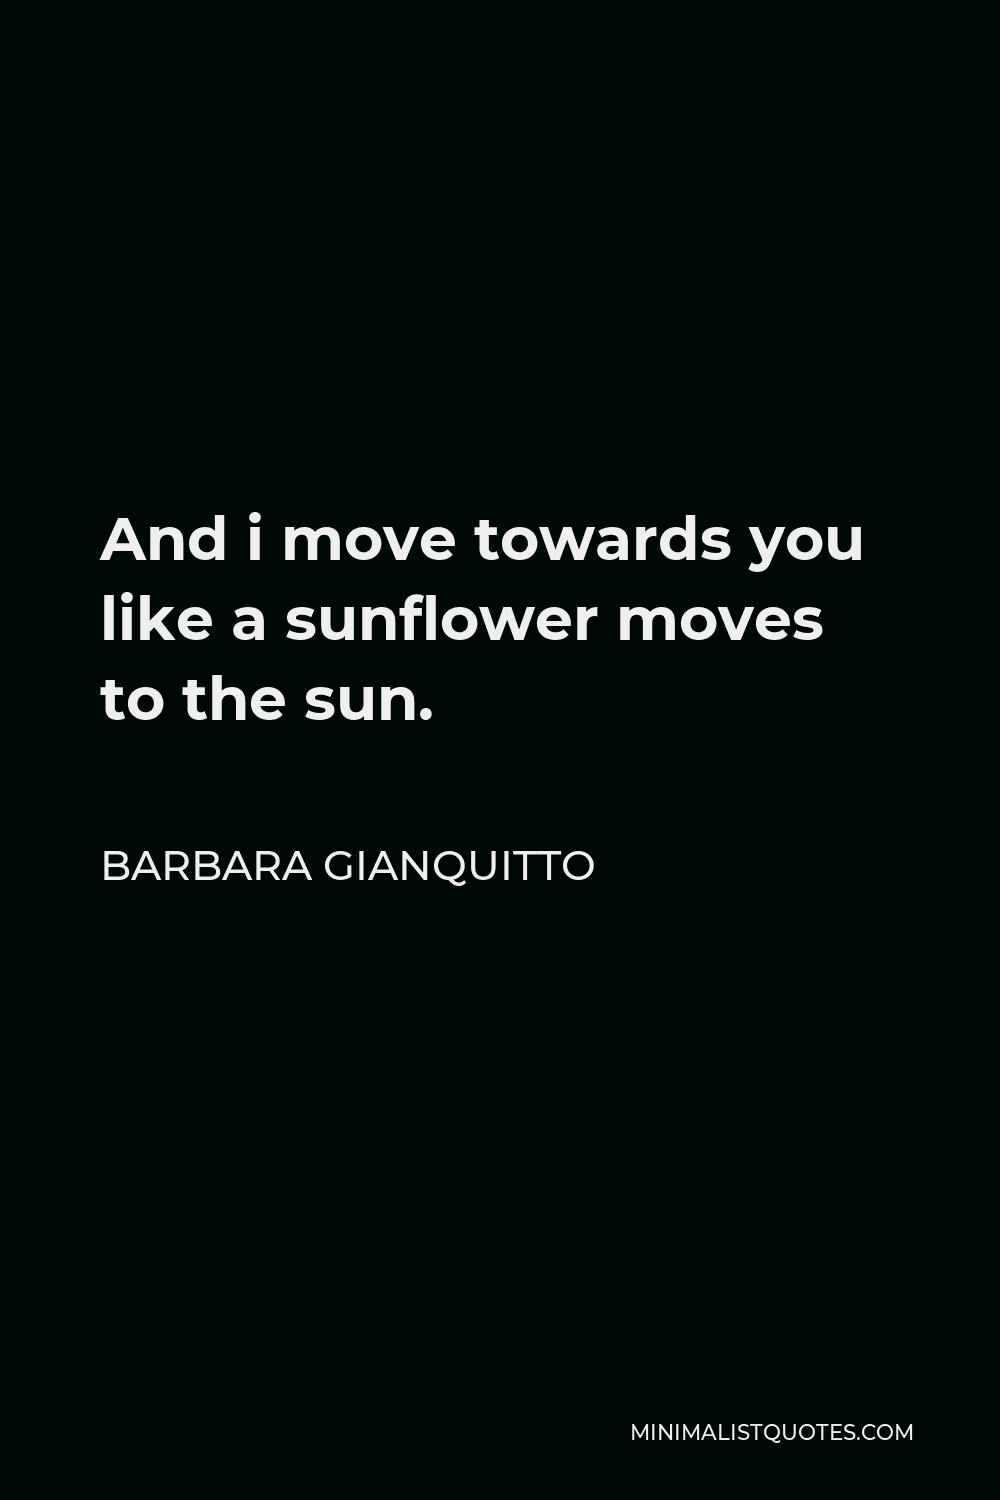 Barbara Gianquitto Quote - And i move towards you like a sunflower moves to the sun.